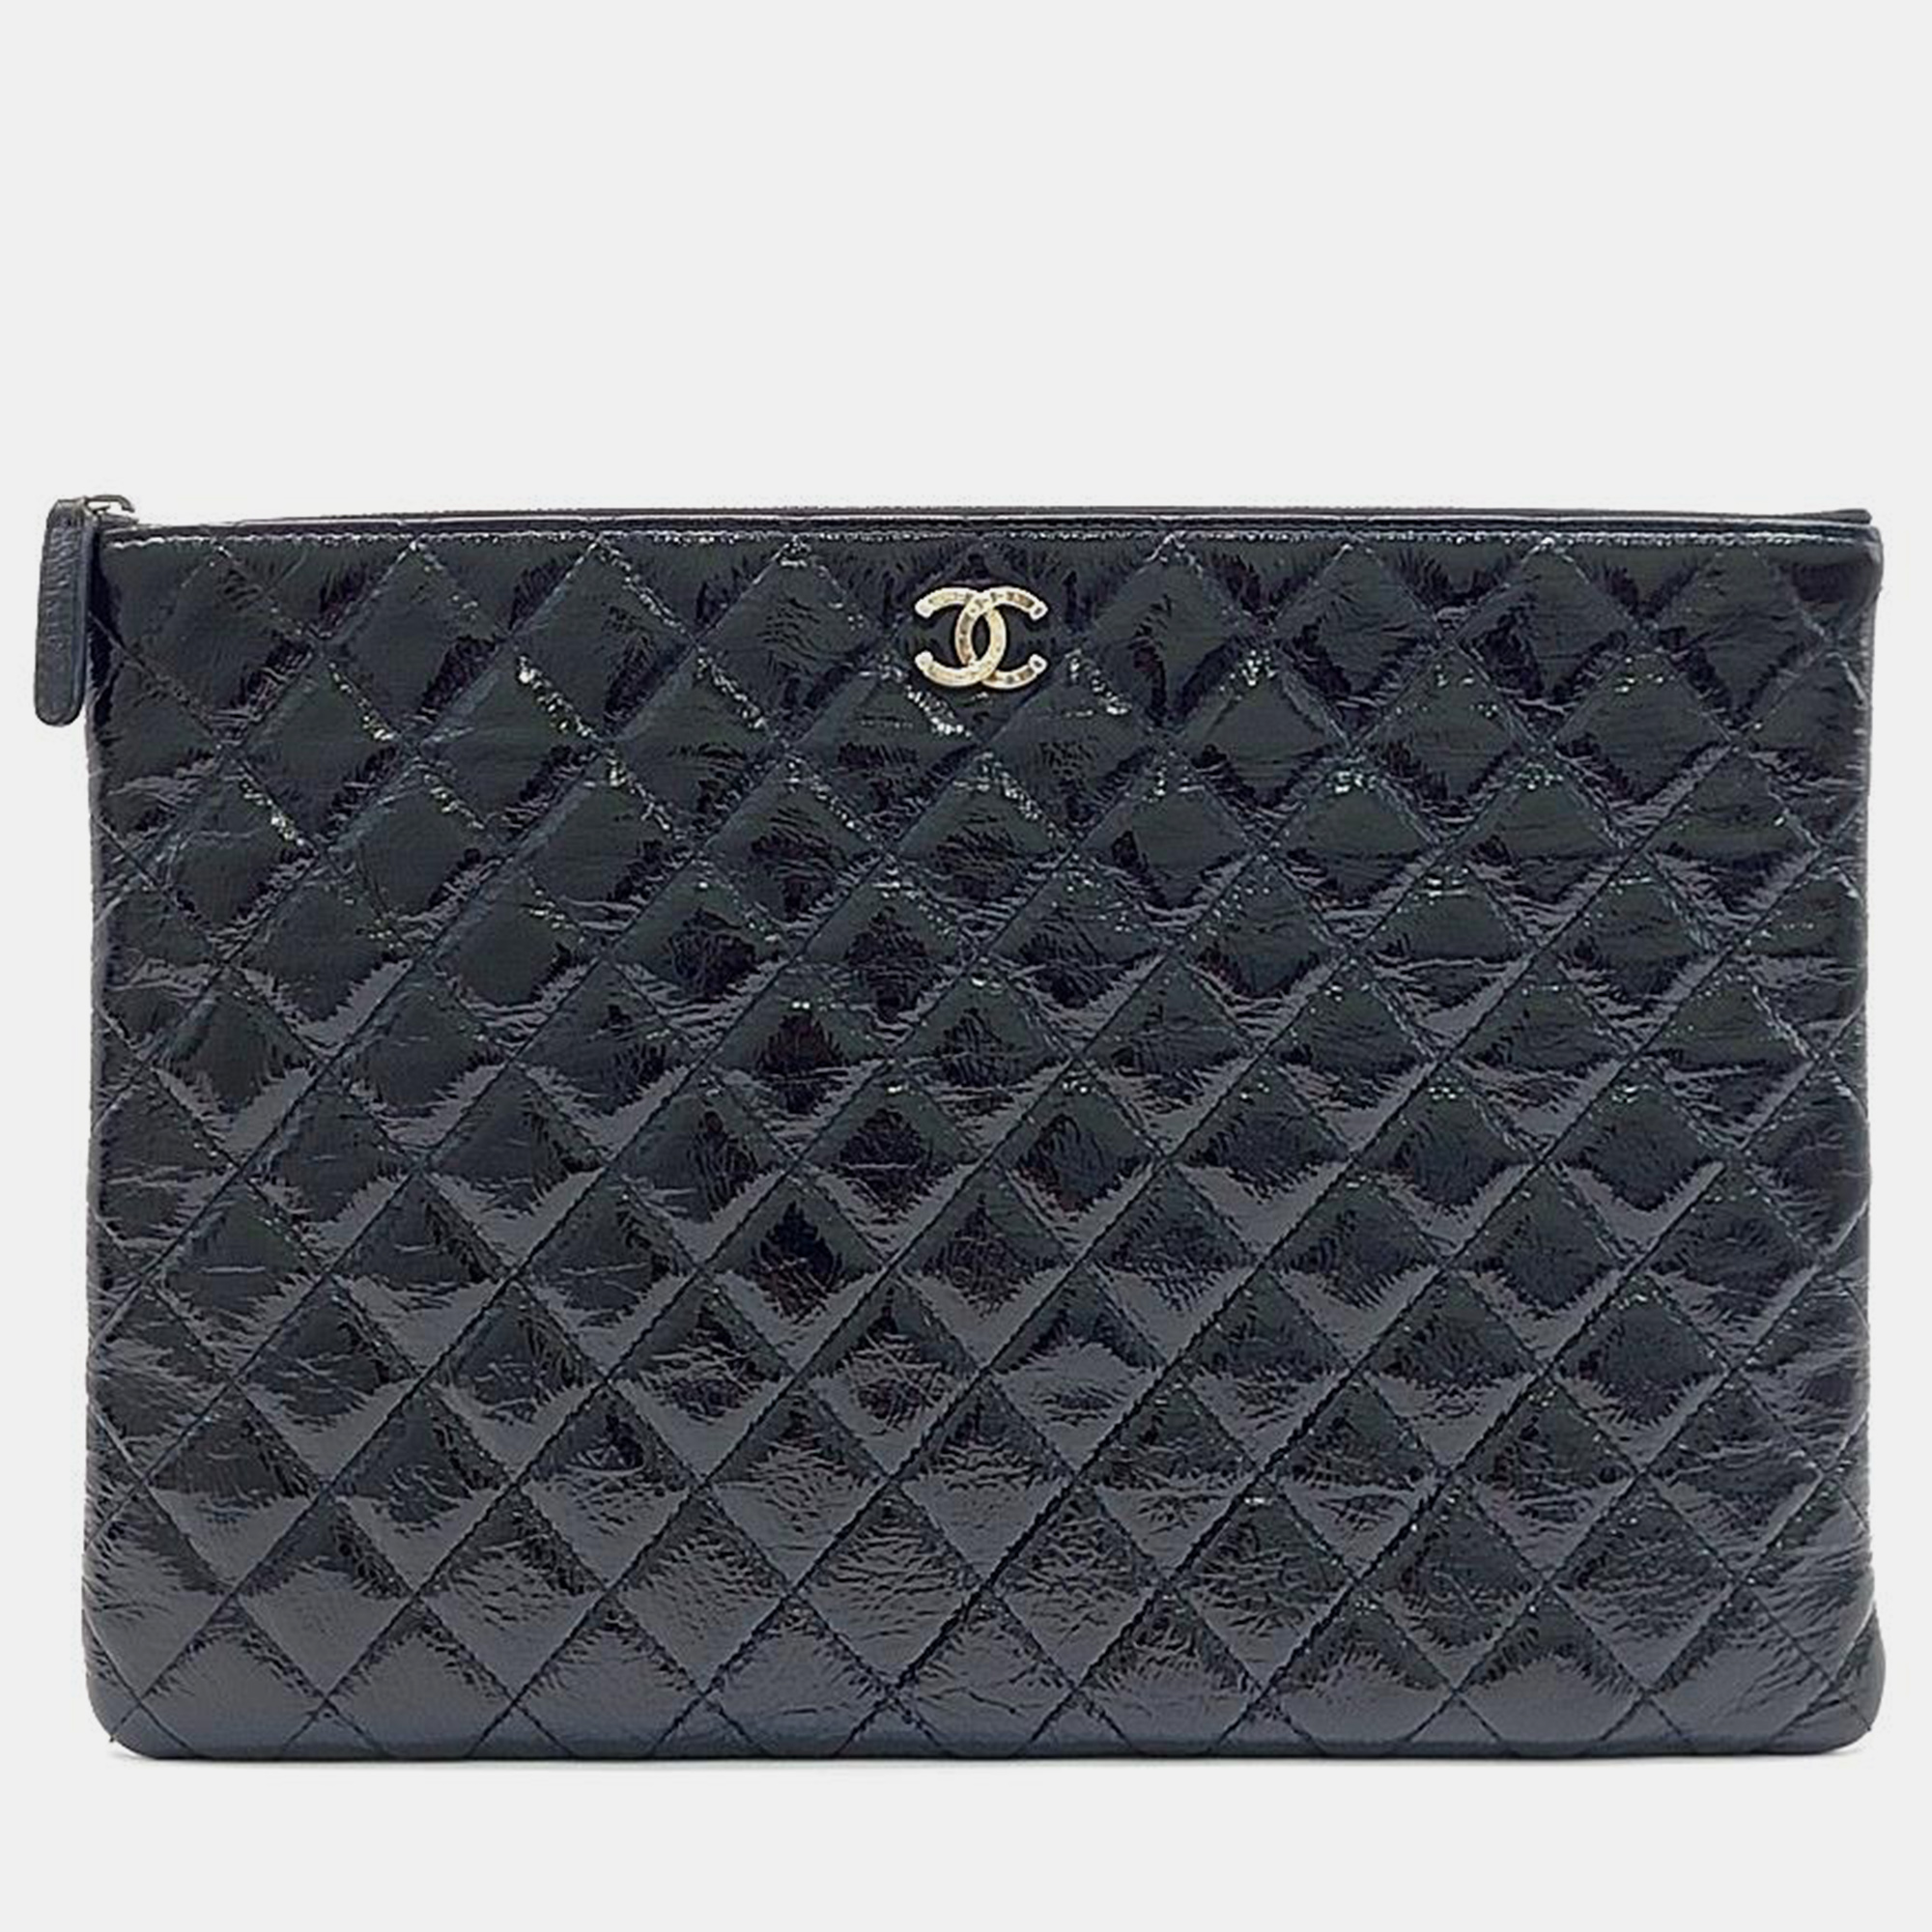 Chanel patent large clutch a69359